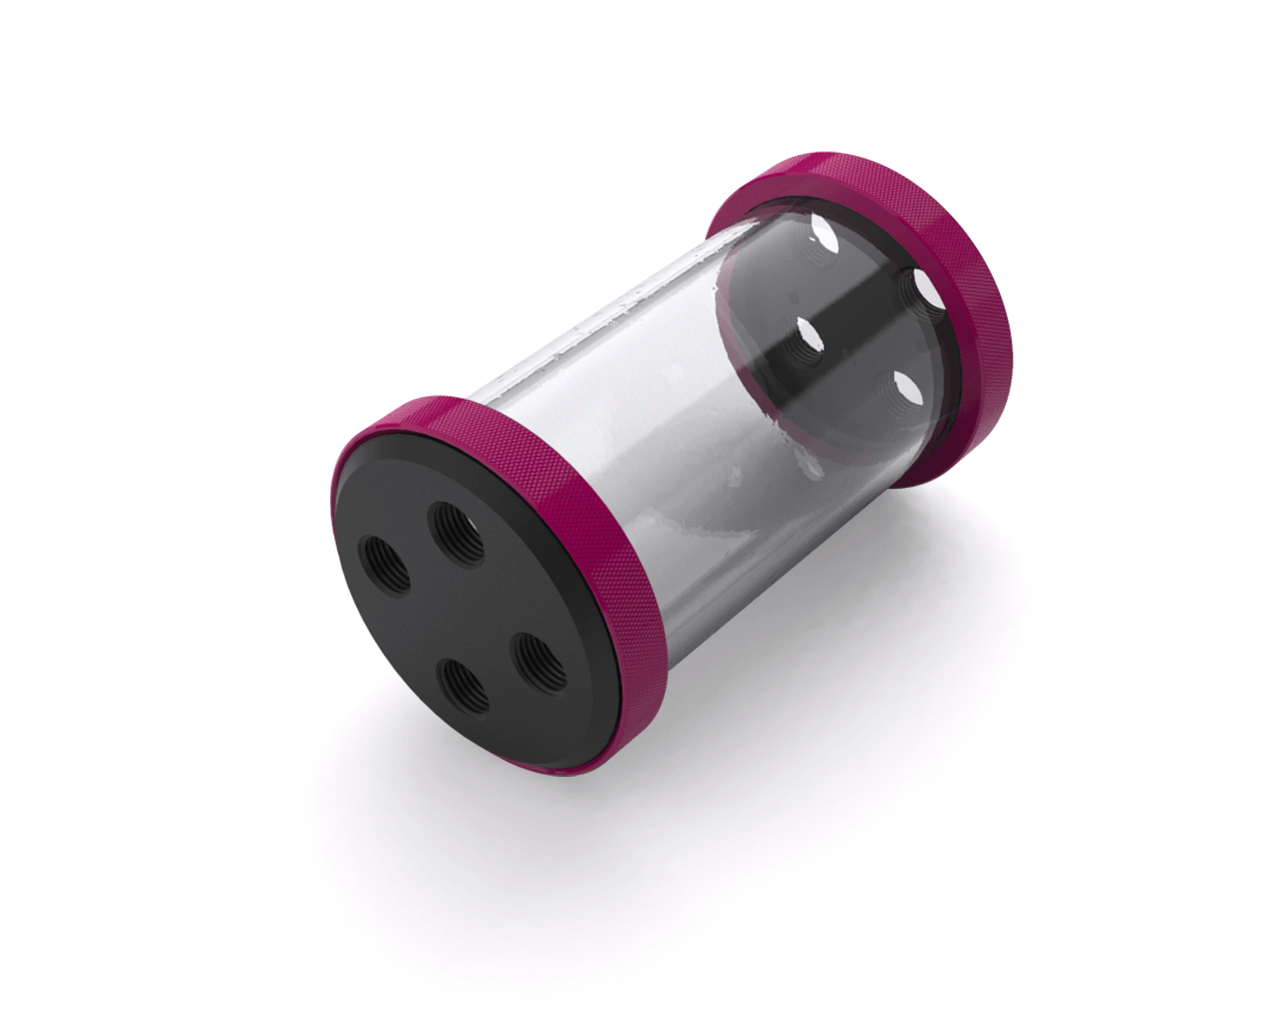 PrimoChill CTR Low Profile Phase II Reservoir - Black POM - 120mm - PrimoChill - KEEPING IT COOL Magenta